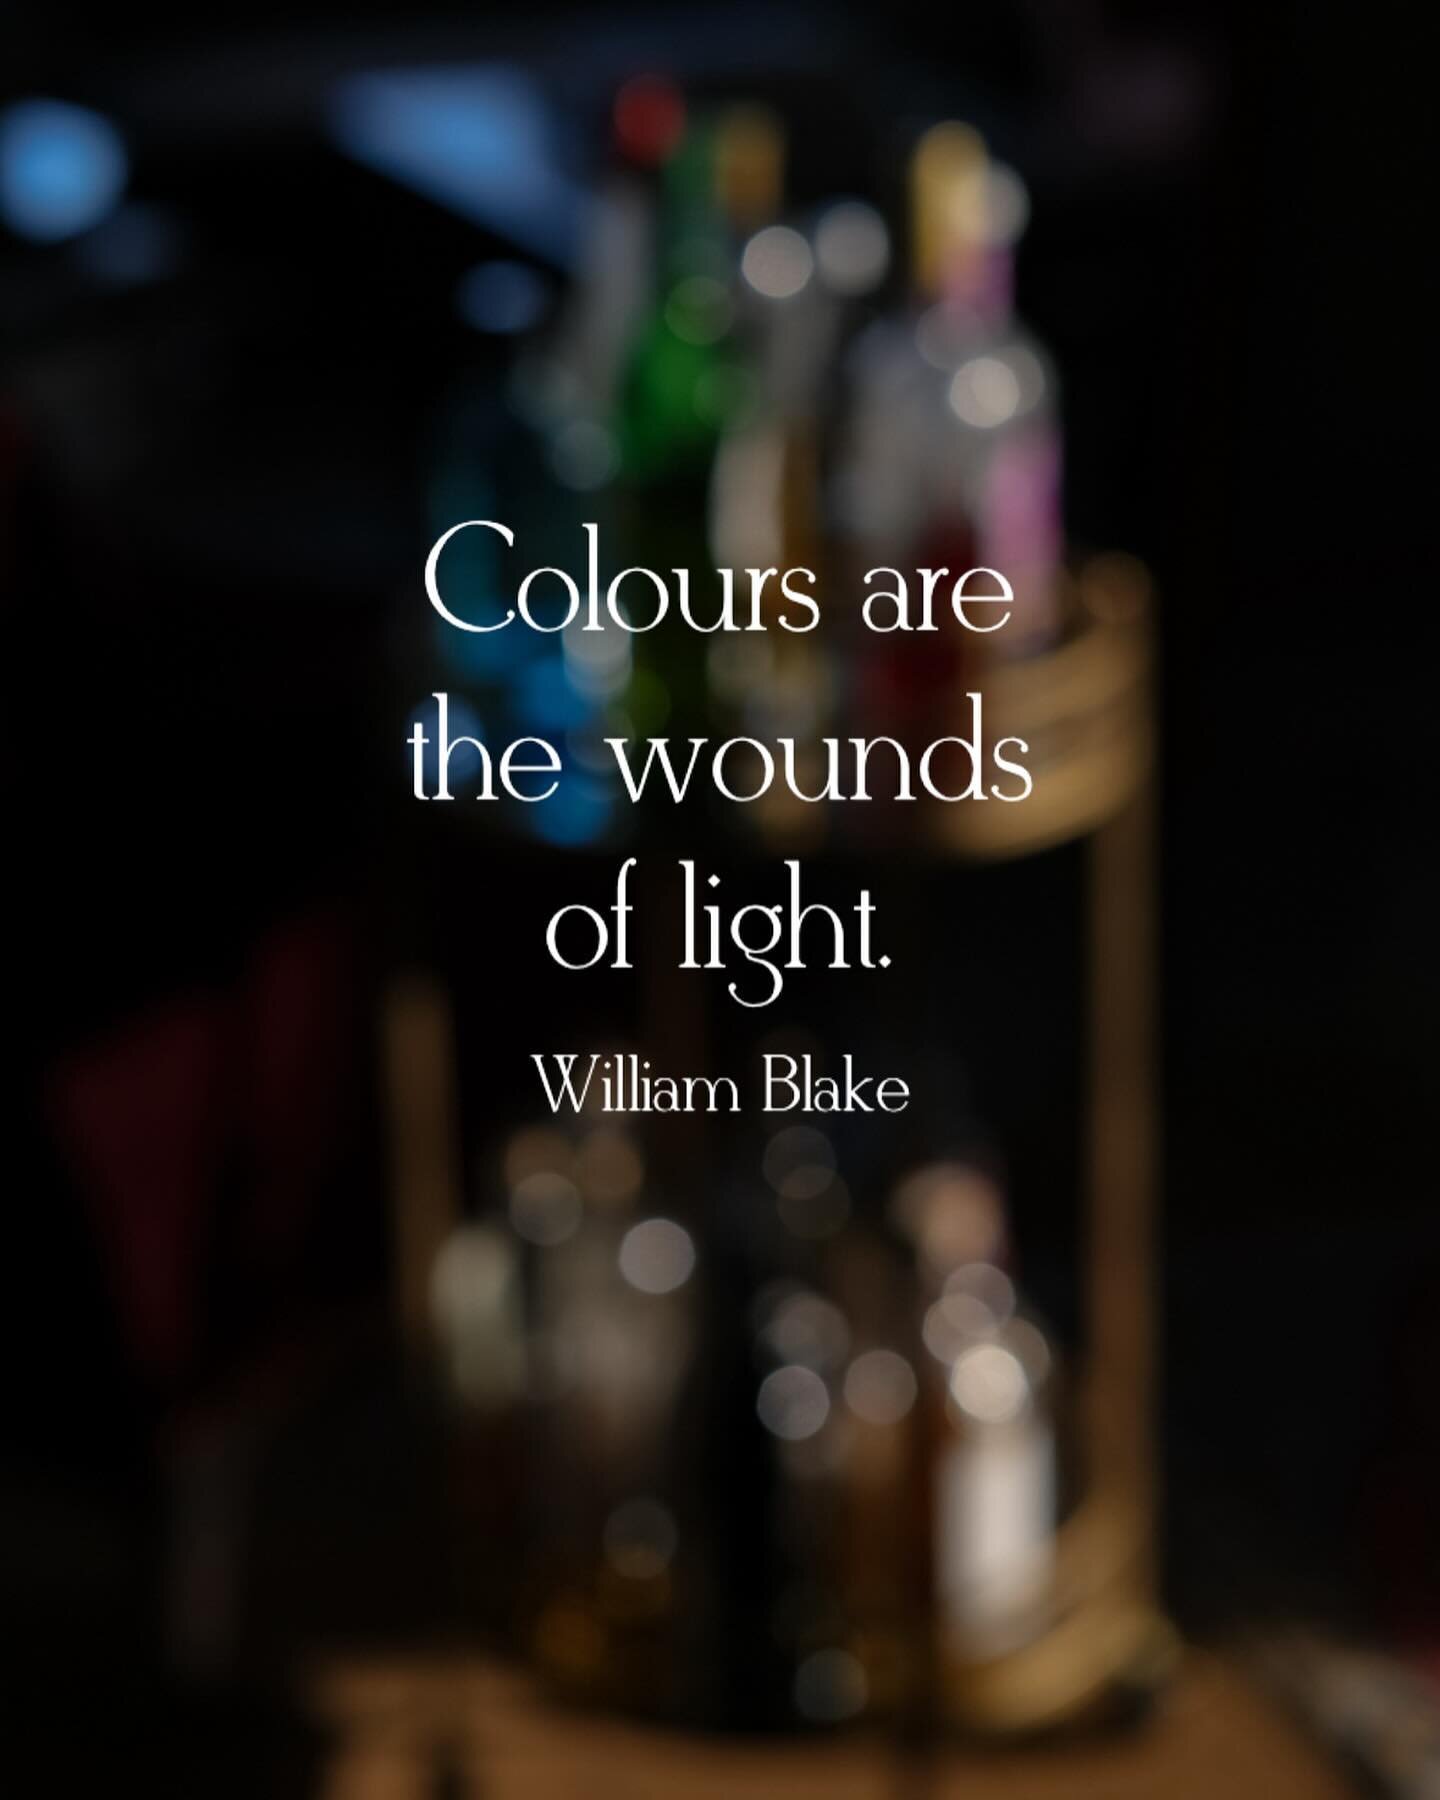 &ldquo;Colours are the wounds of light.&rdquo; William Blake

&ldquo;No one expects the days to be gods.&rdquo; Emerson

&ldquo;Light is incredibly generous, but also gentle.&rdquo; John O&rsquo;Donohue

#thesubjectislight #thesubjectiscolour